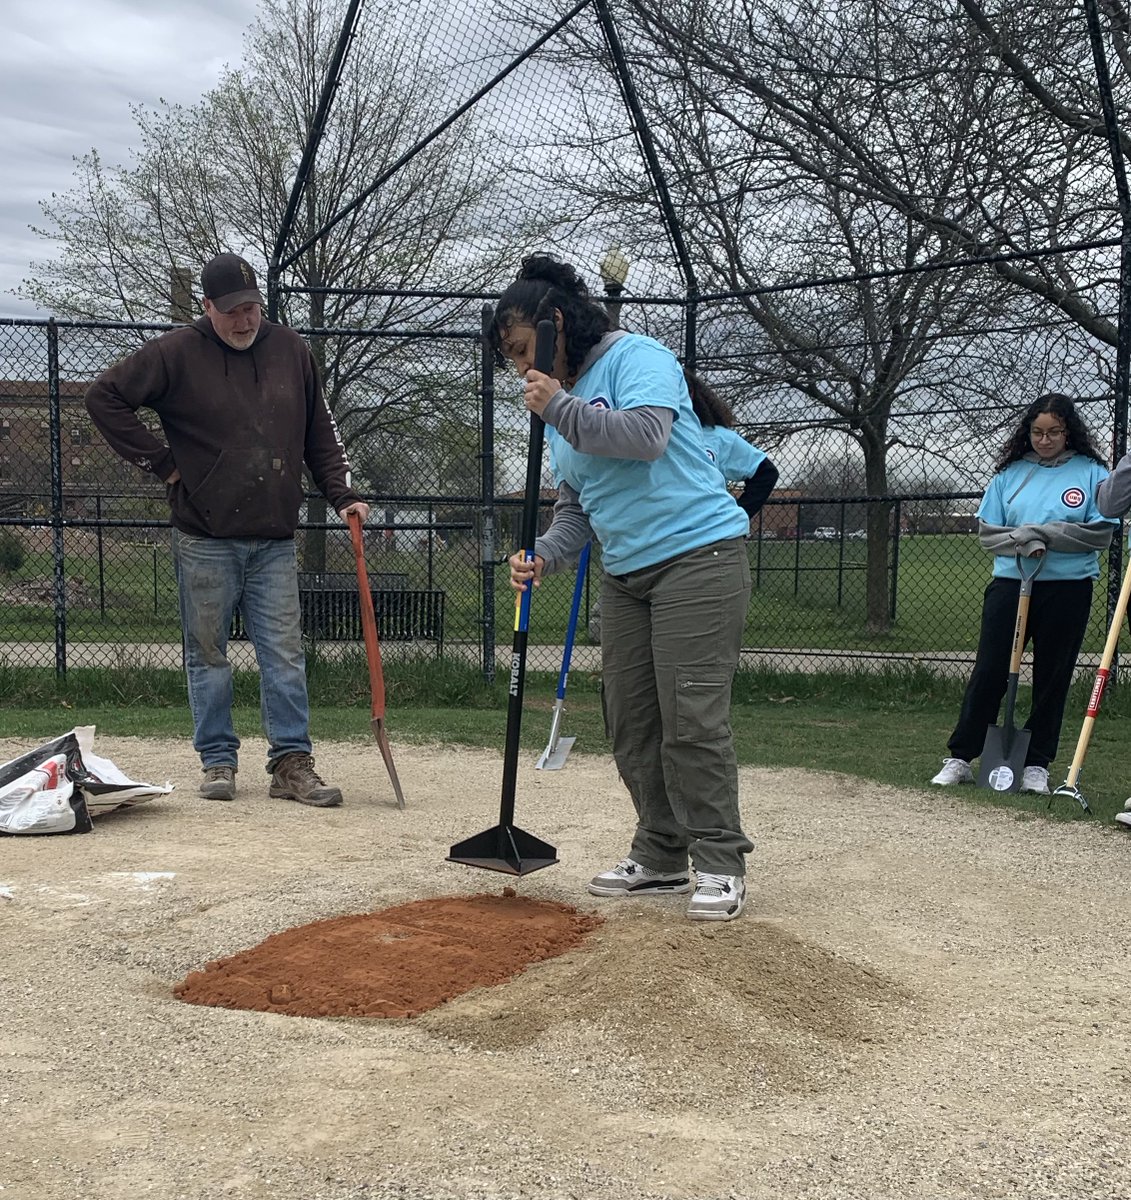 Cubs Charities held a #DiamondProject Field Maintenance Workshop at Hanson Park to share tricks of the trade with Prosser High School baseball and softball players! Thank you @sportsfieldsinc and @wendylvasquez ⚾🥎🌟